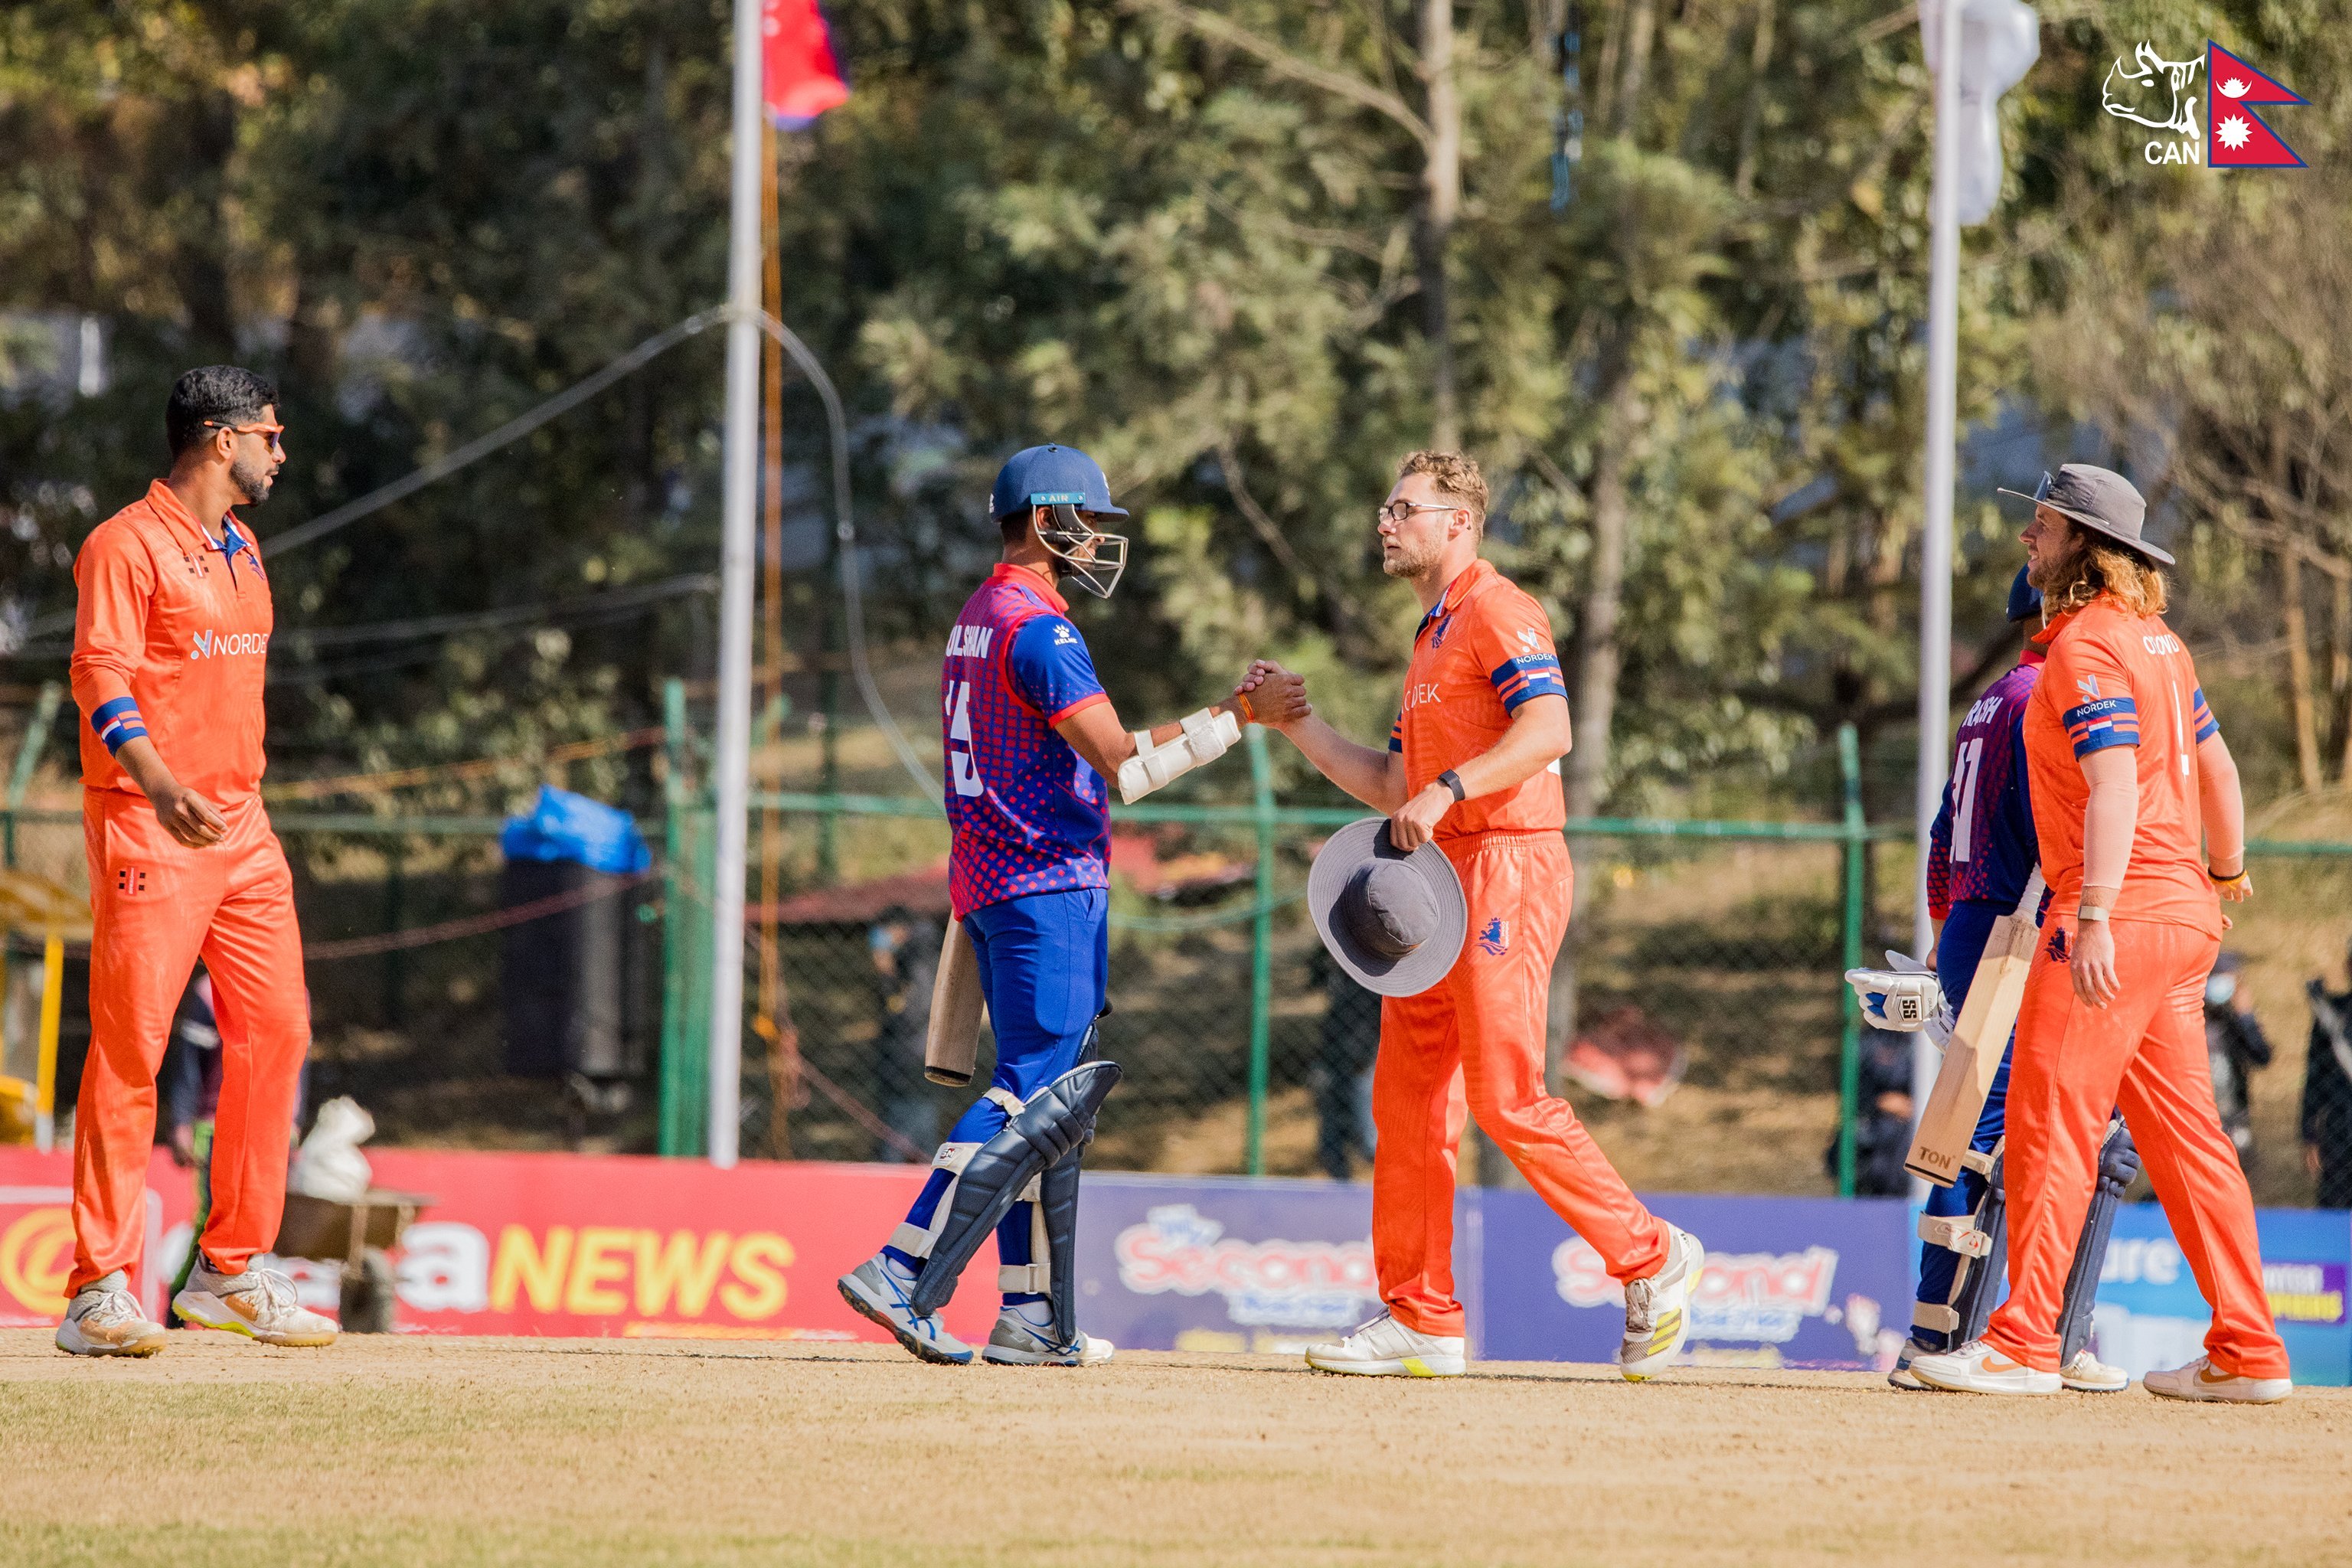 Netherlands secures nail-biting win by two runs over Nepal in T20I clash